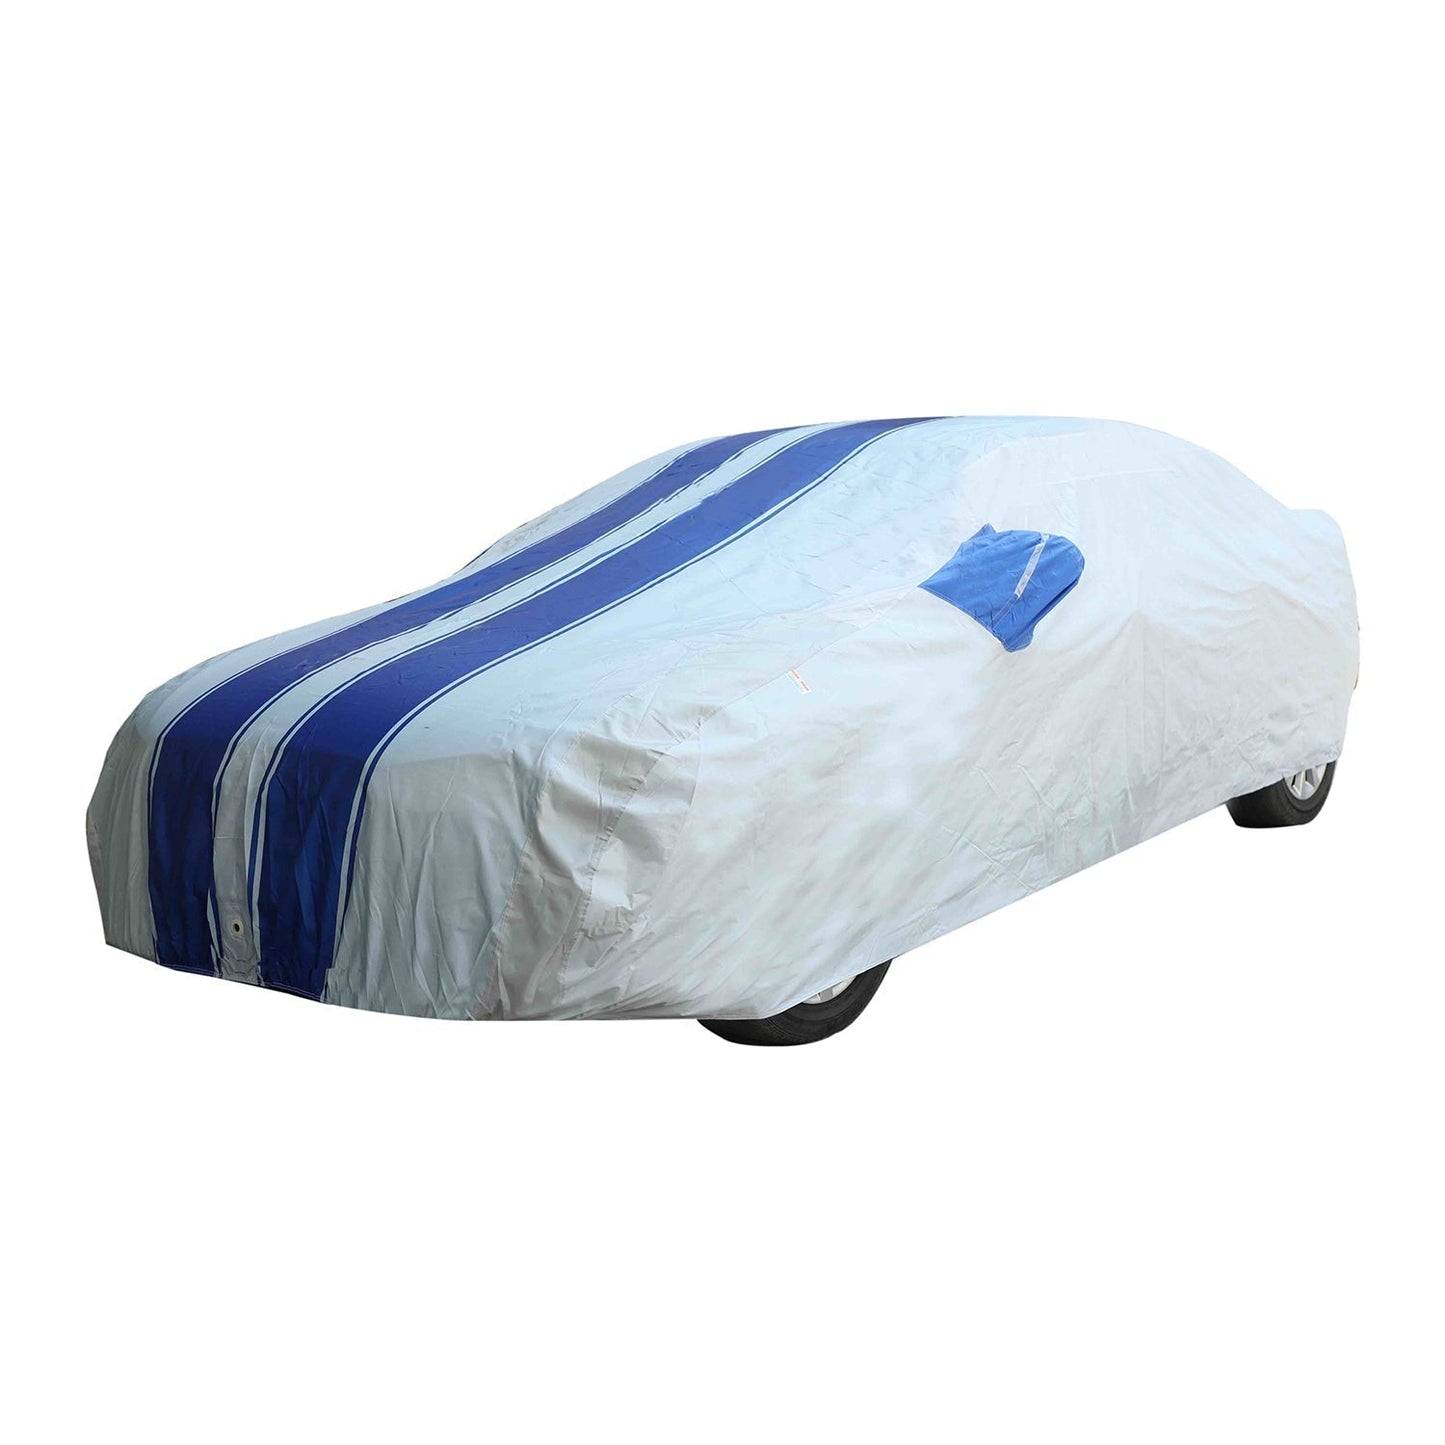 Oshotto 100% Blue dustproof and Water Resistant Car Body Cover with Mirror Pockets For Honda Accord